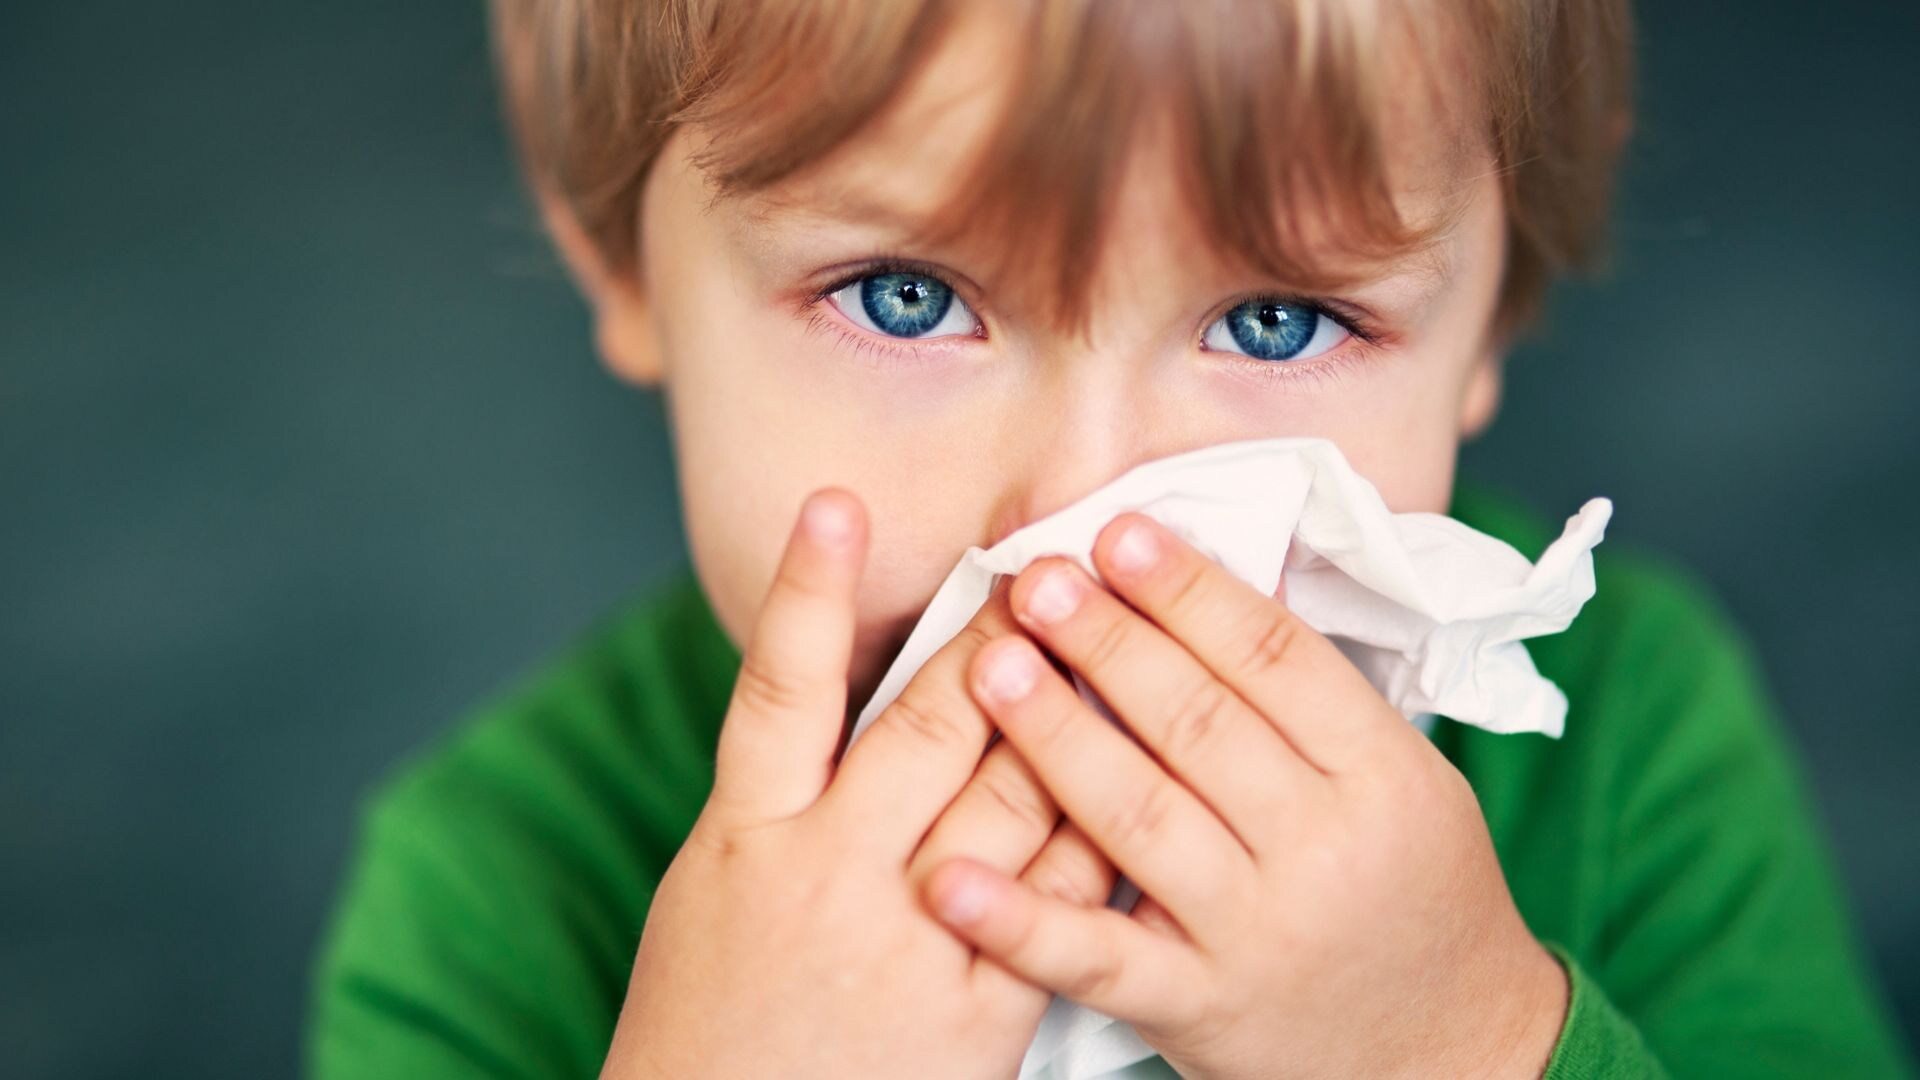 The four-year-old had a chronic cold.  The cause of the problem is shocking